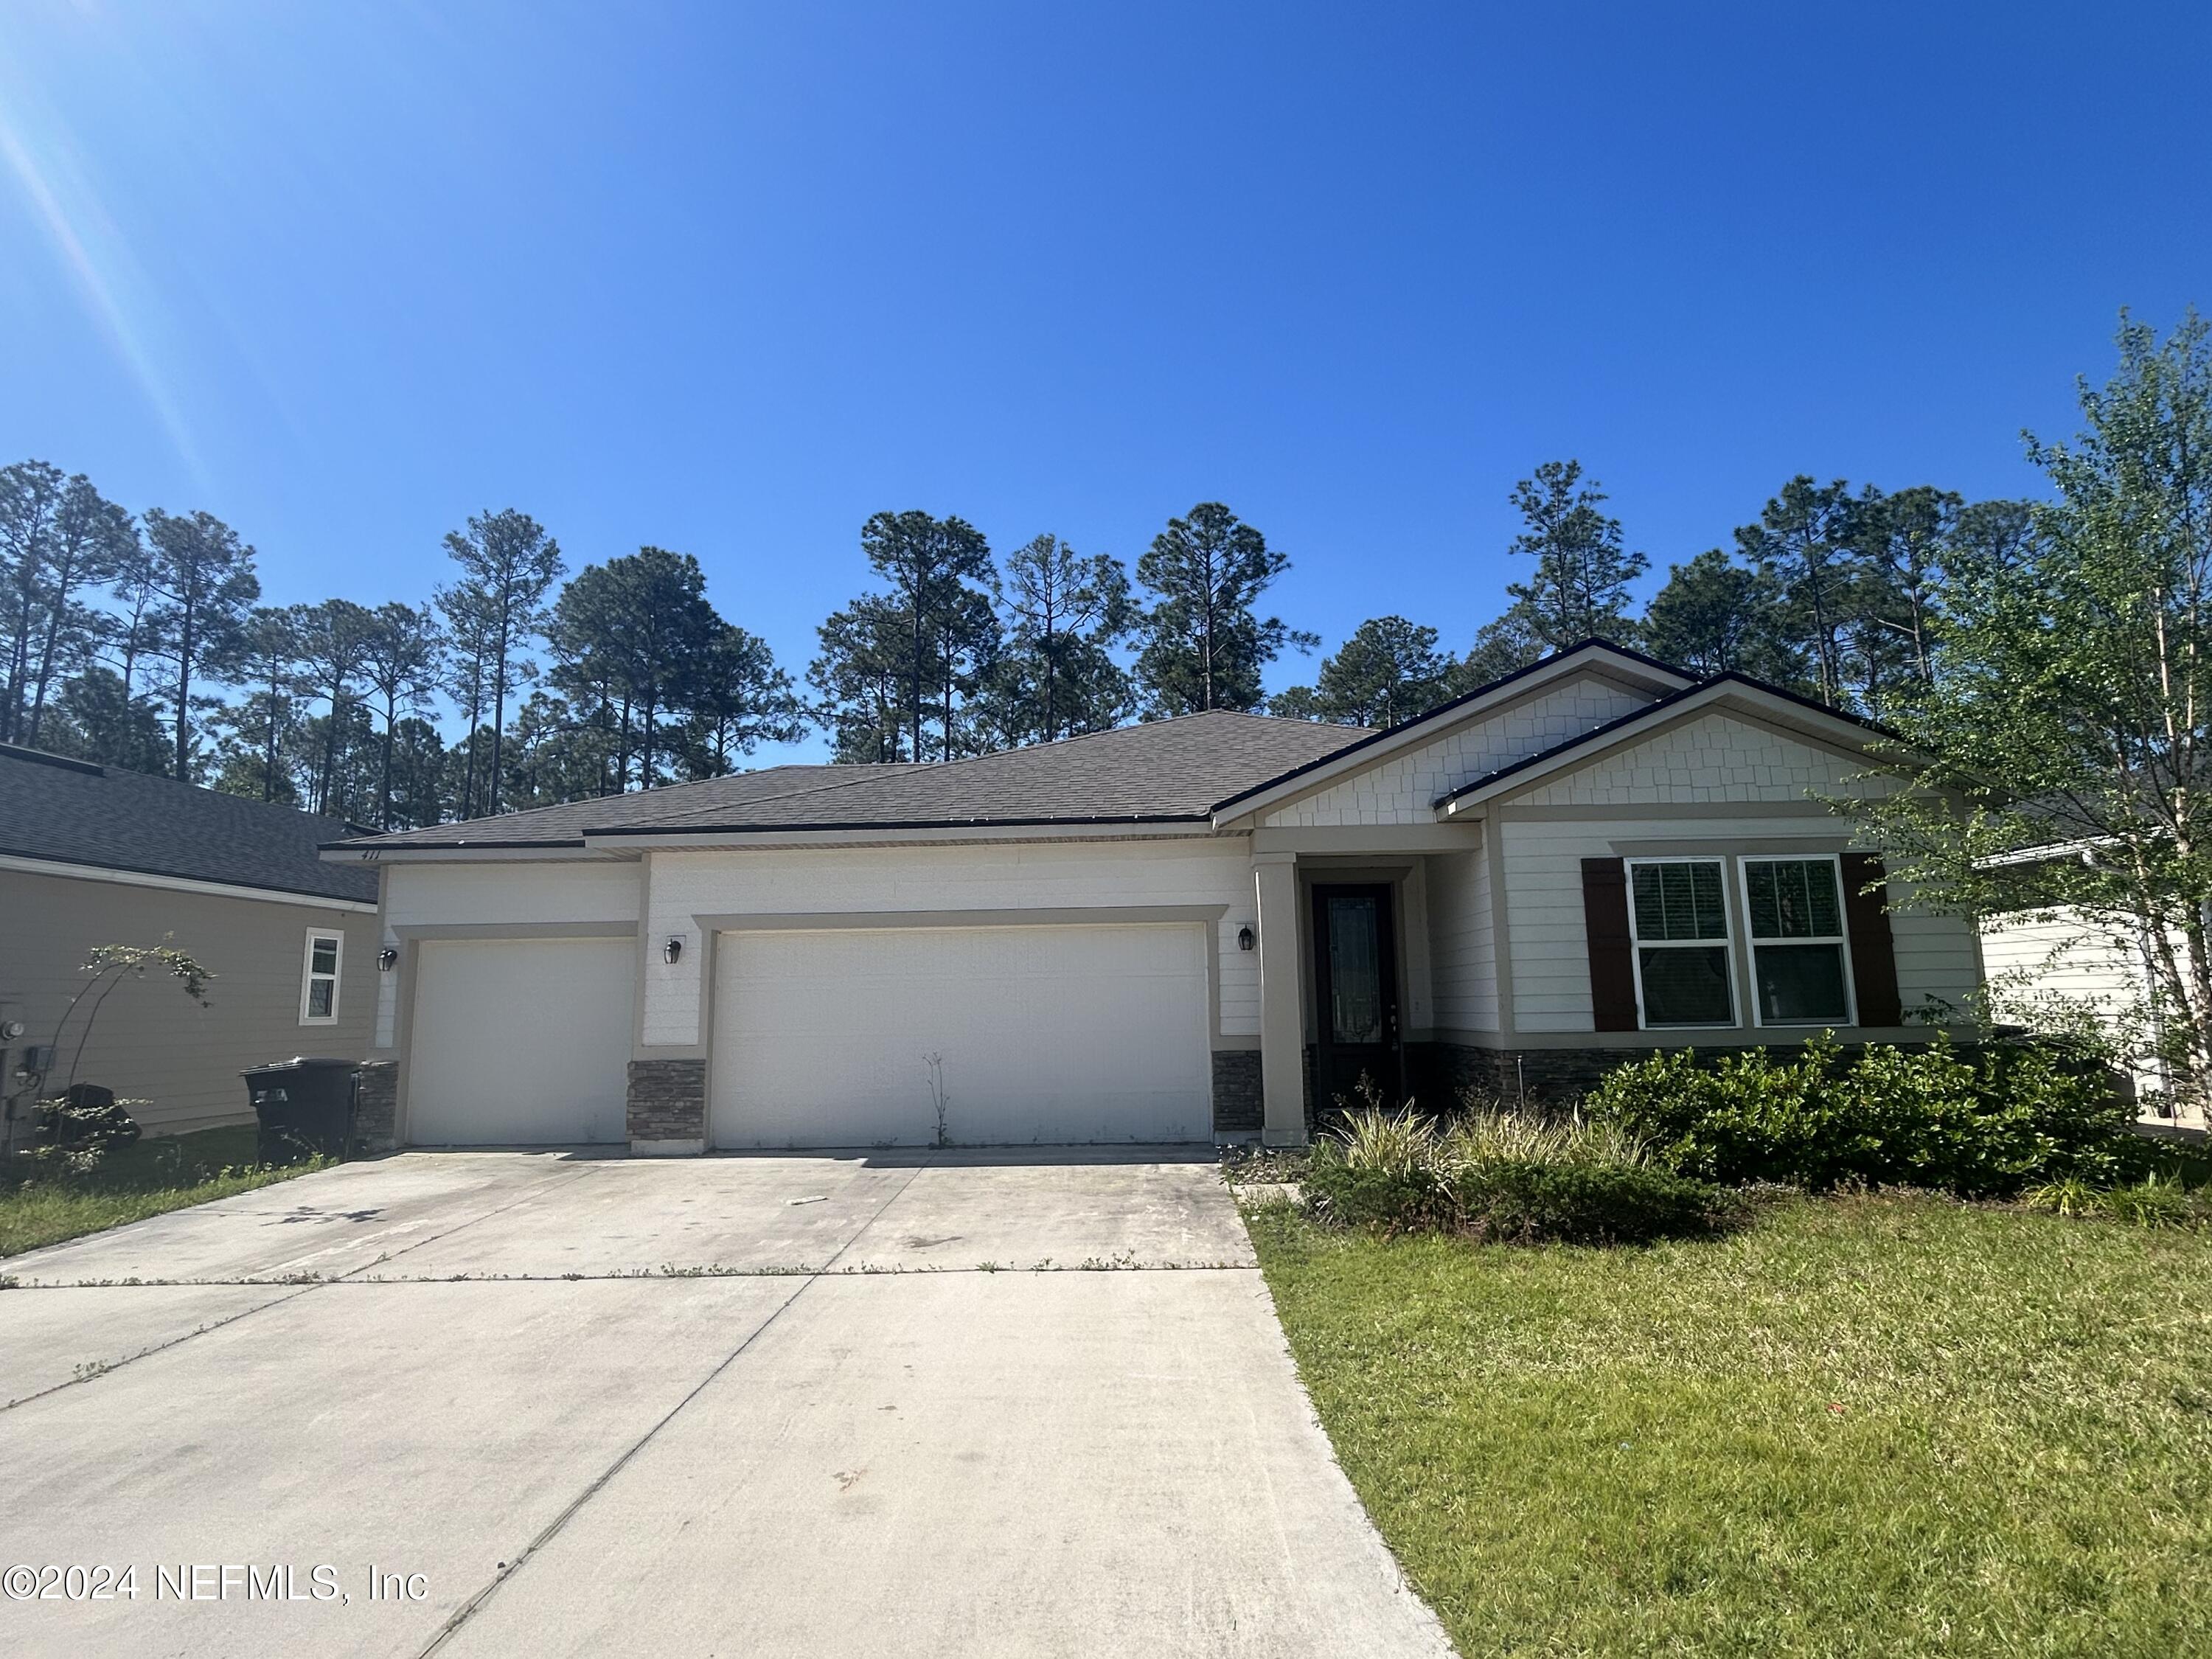 St Johns, FL home for sale located at 411 Rittburn Lane, St Johns, FL 32259